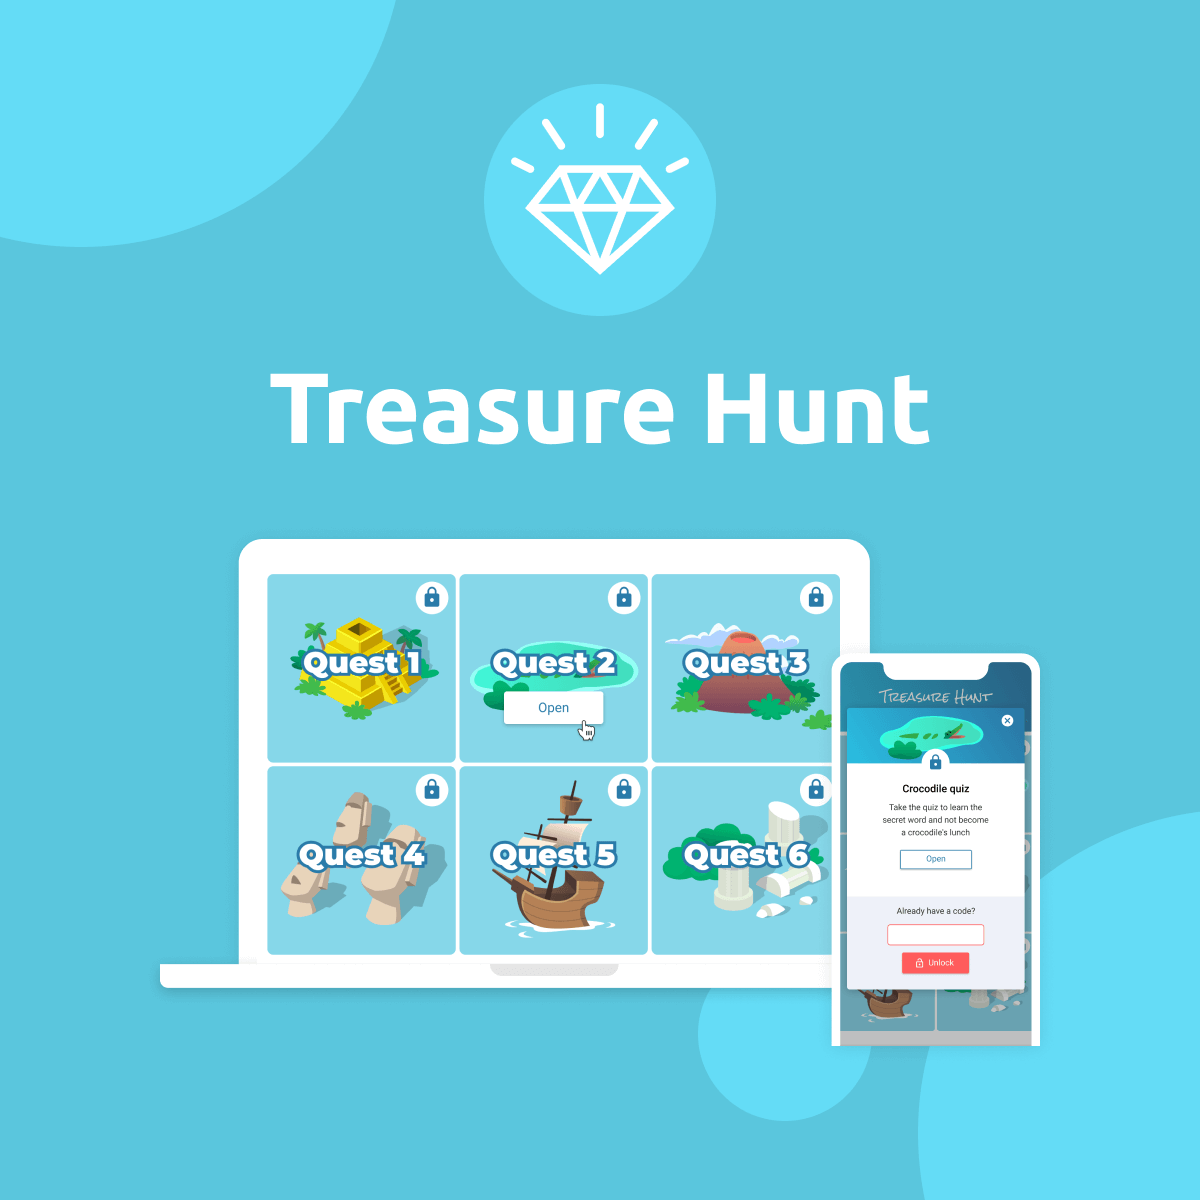 Treasure hunting to connect with your community